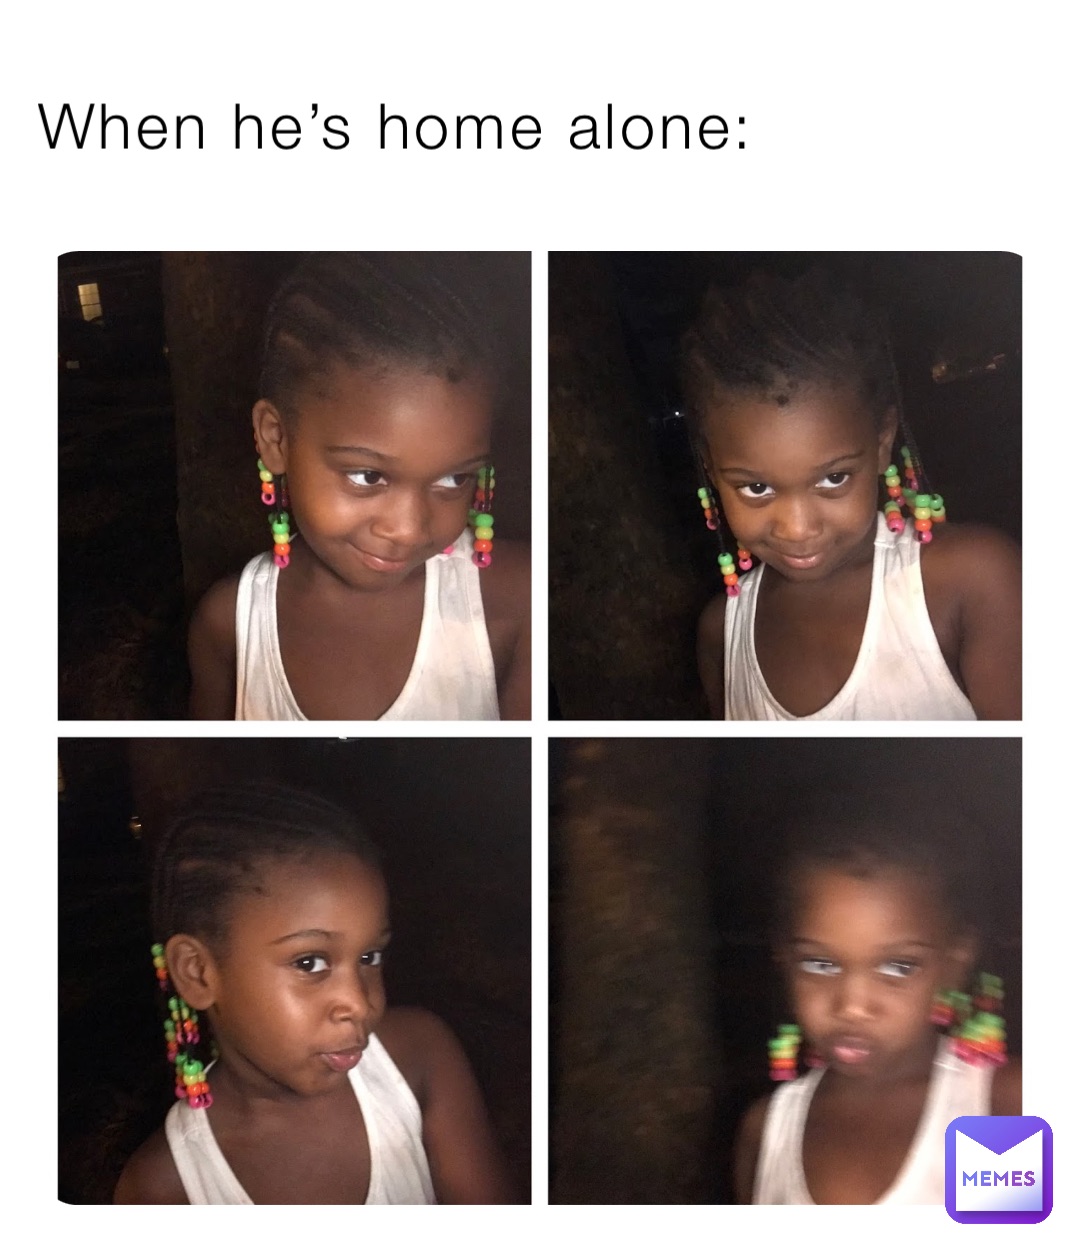 When he’s home alone: